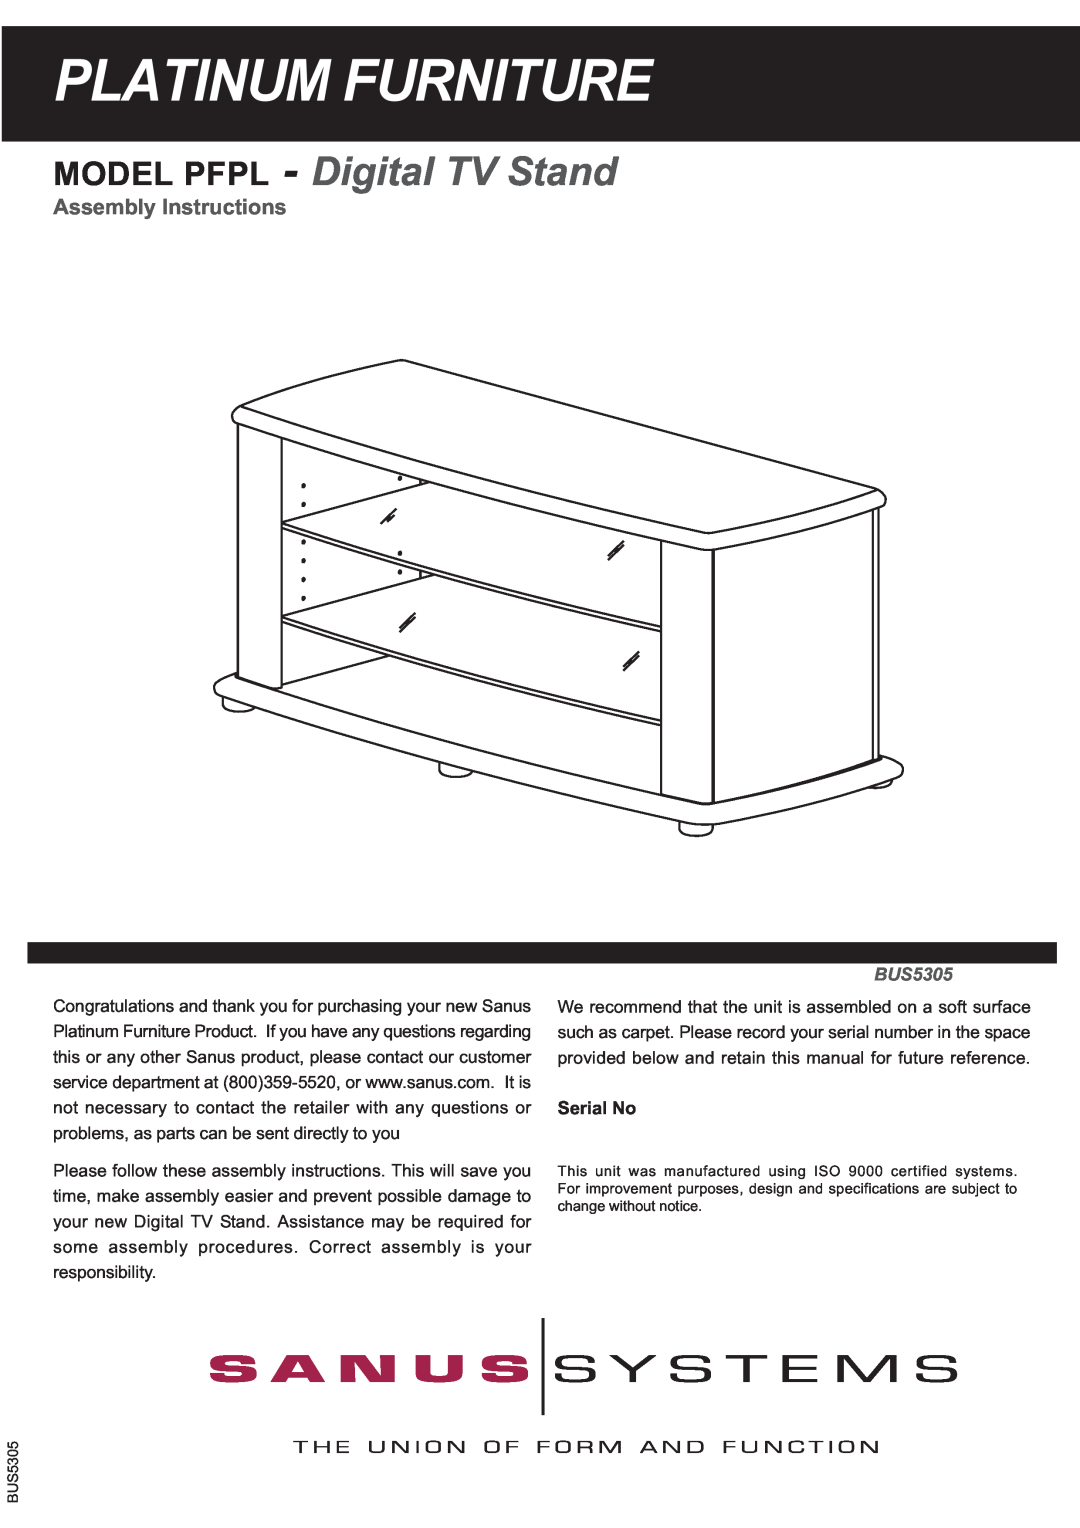 Sanus Systems specifications Platinum Furniture, MODEL PFPL - Digital TV Stand, Assembly Instructions, BUS5305 